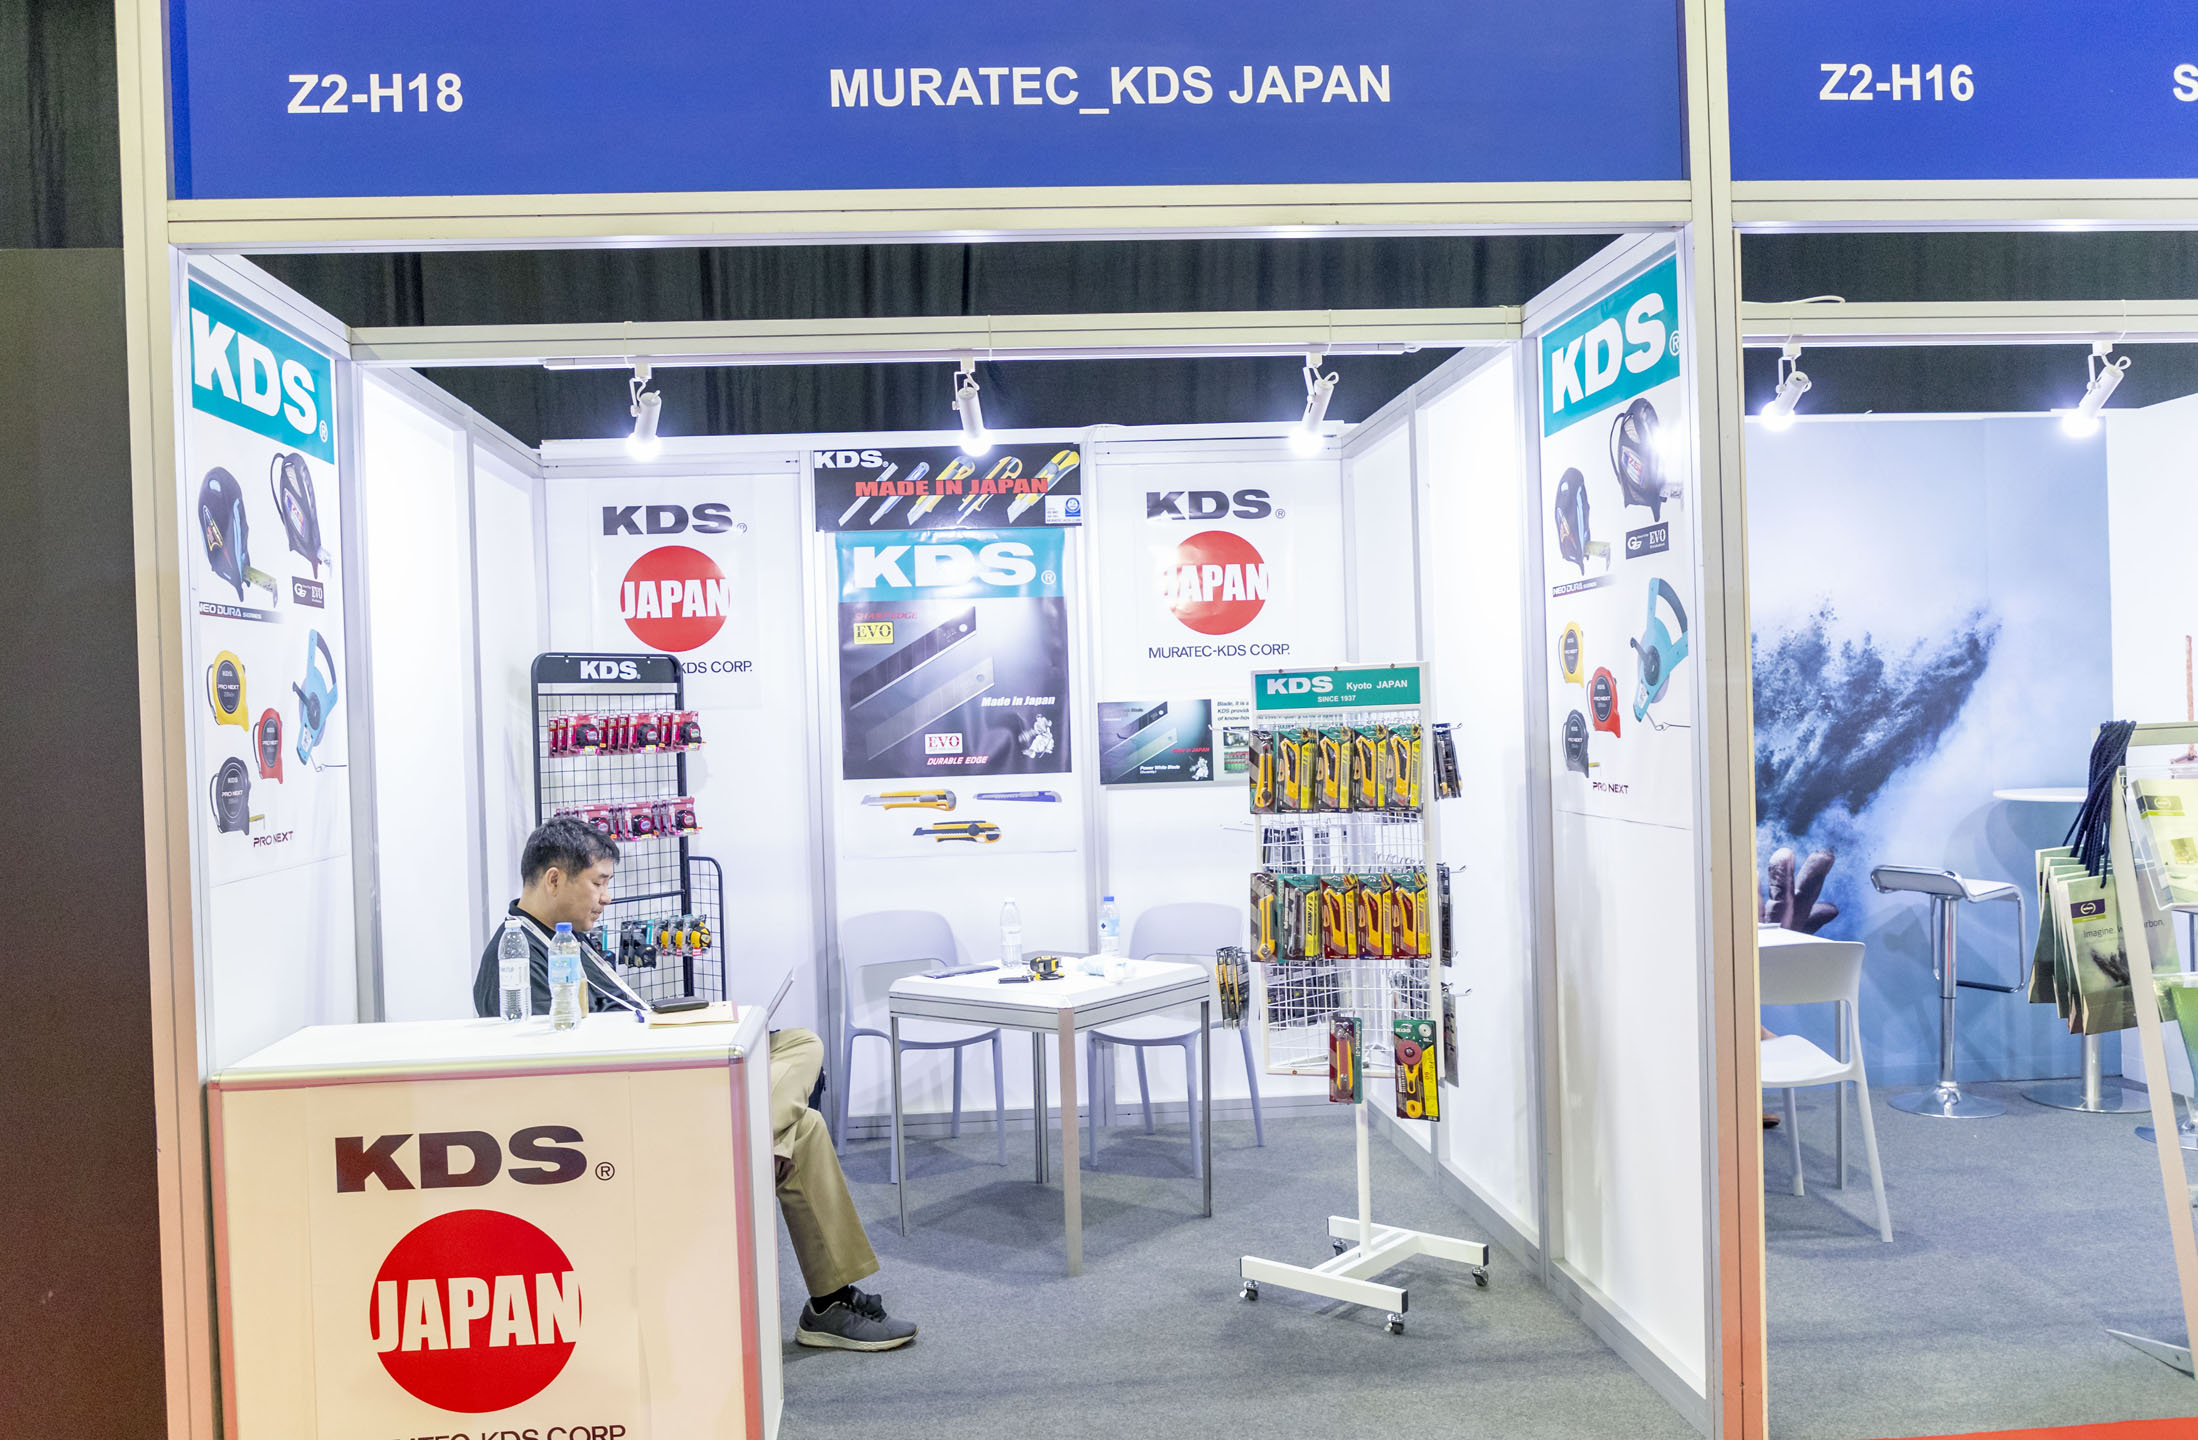 Hardware + Tools Middle East 2019